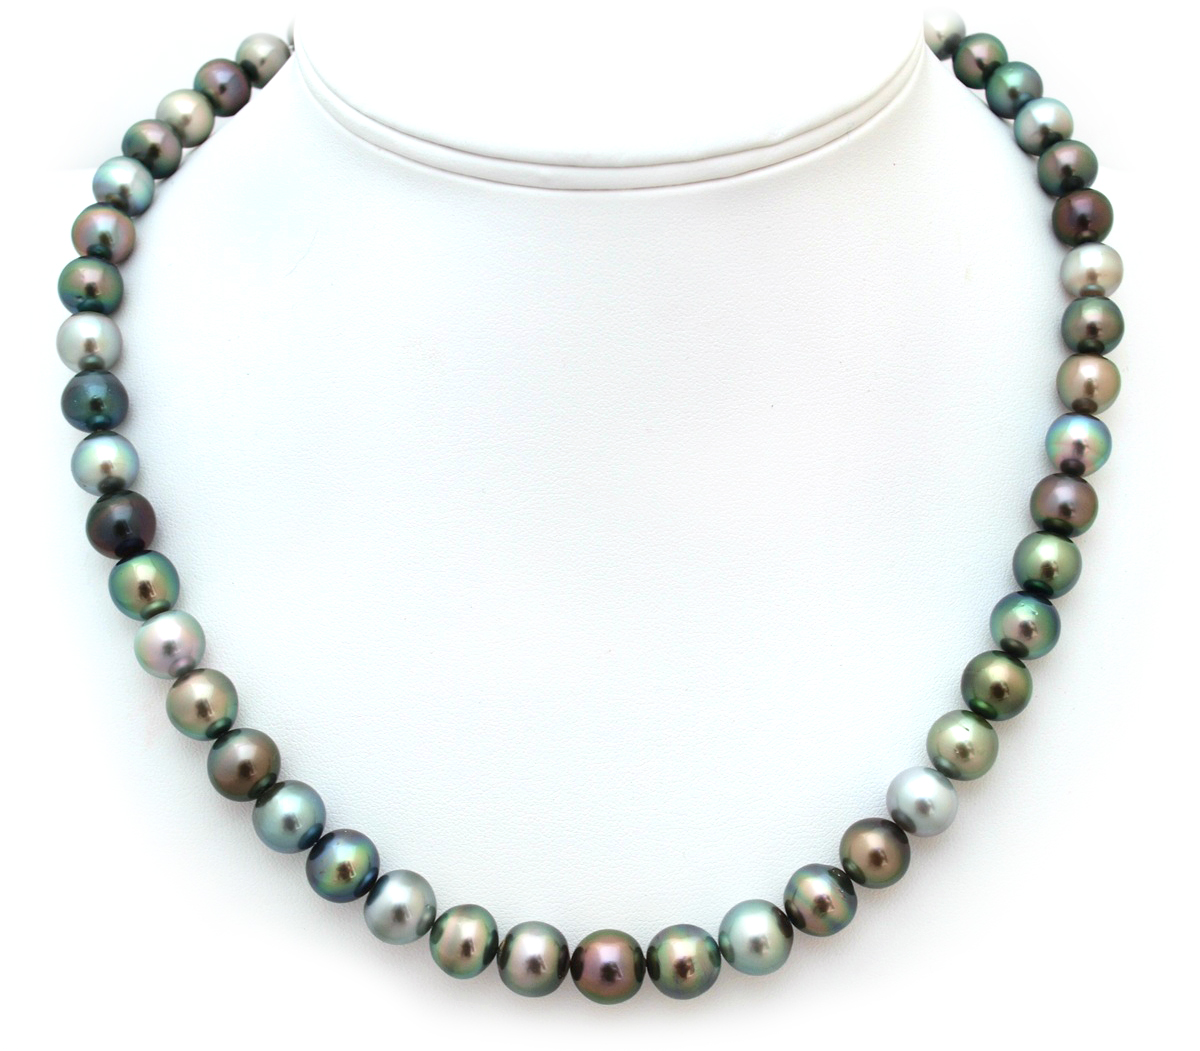 Off Round Tahitian Pearl Necklace with Mixed Fancy Color Tahitian Pearls